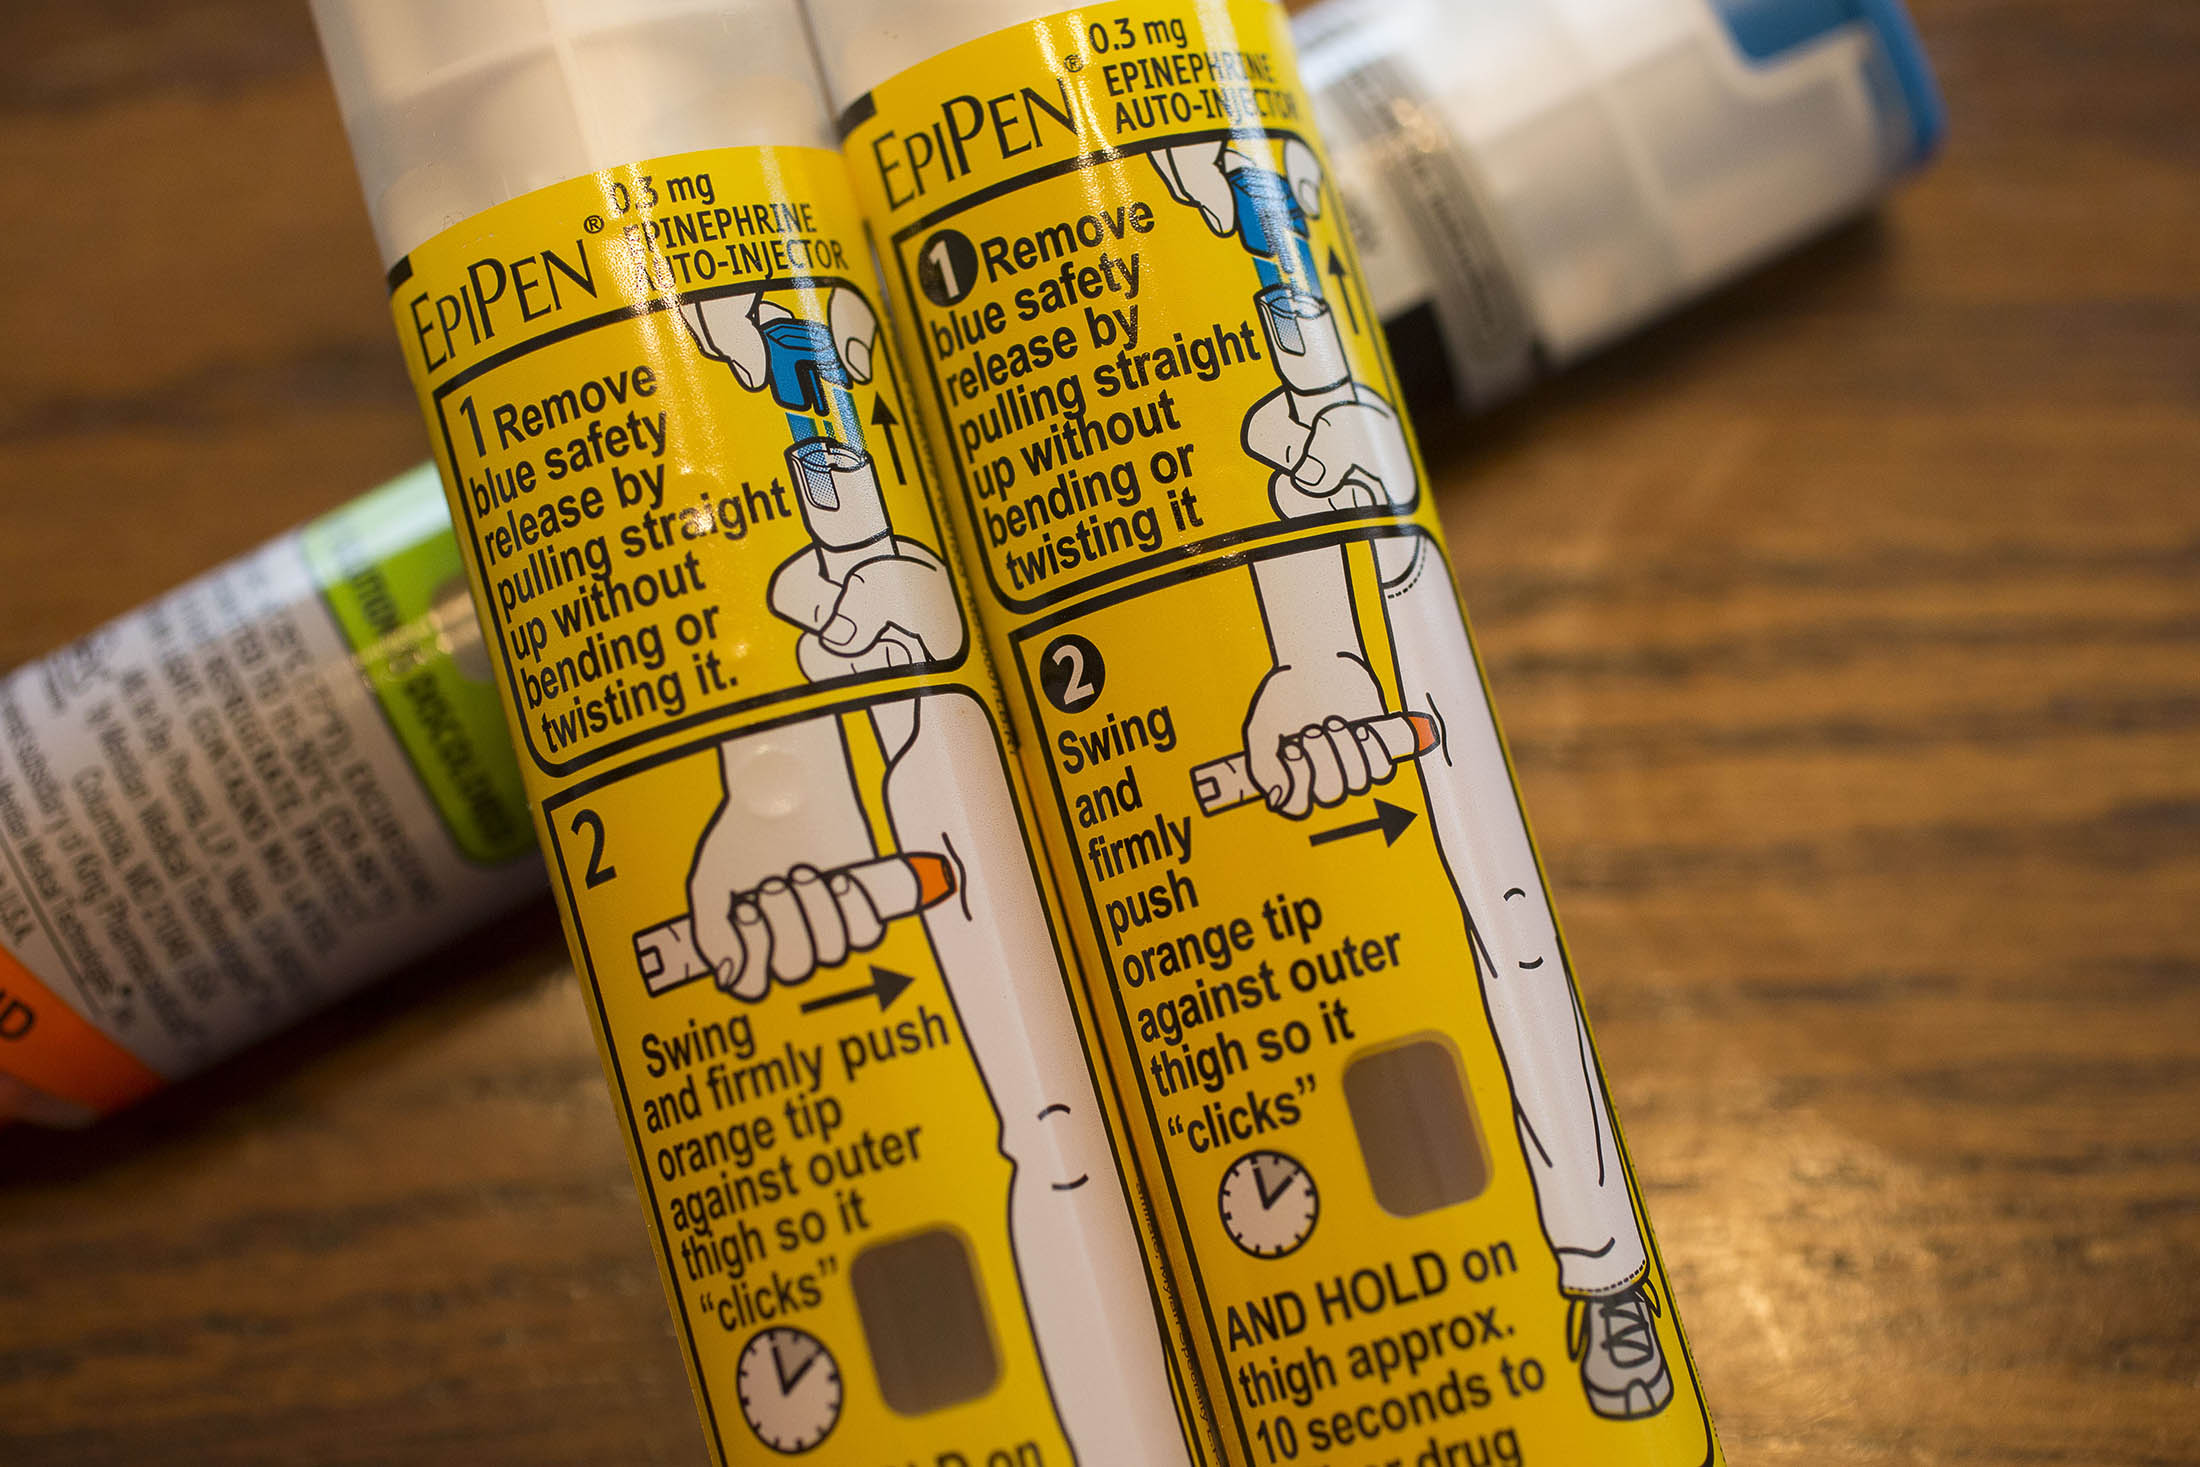 Mylan NV's EpiPen allergy shots sit on display for a photograph in Princeton, Illinois, U.S., on Friday, Aug. 26, 2016. In response to intense criticism over the past few days, Mylan NV moved Thursday to expand assistance programs that help patients with high out-of-pocket expenses -- but didn't go as far as cutting the treatment's list price. Health insurers and U.S. lawmakers criticized the effort as an attempt to cover a 400 percent price hike that won't make the drug more affordable.
